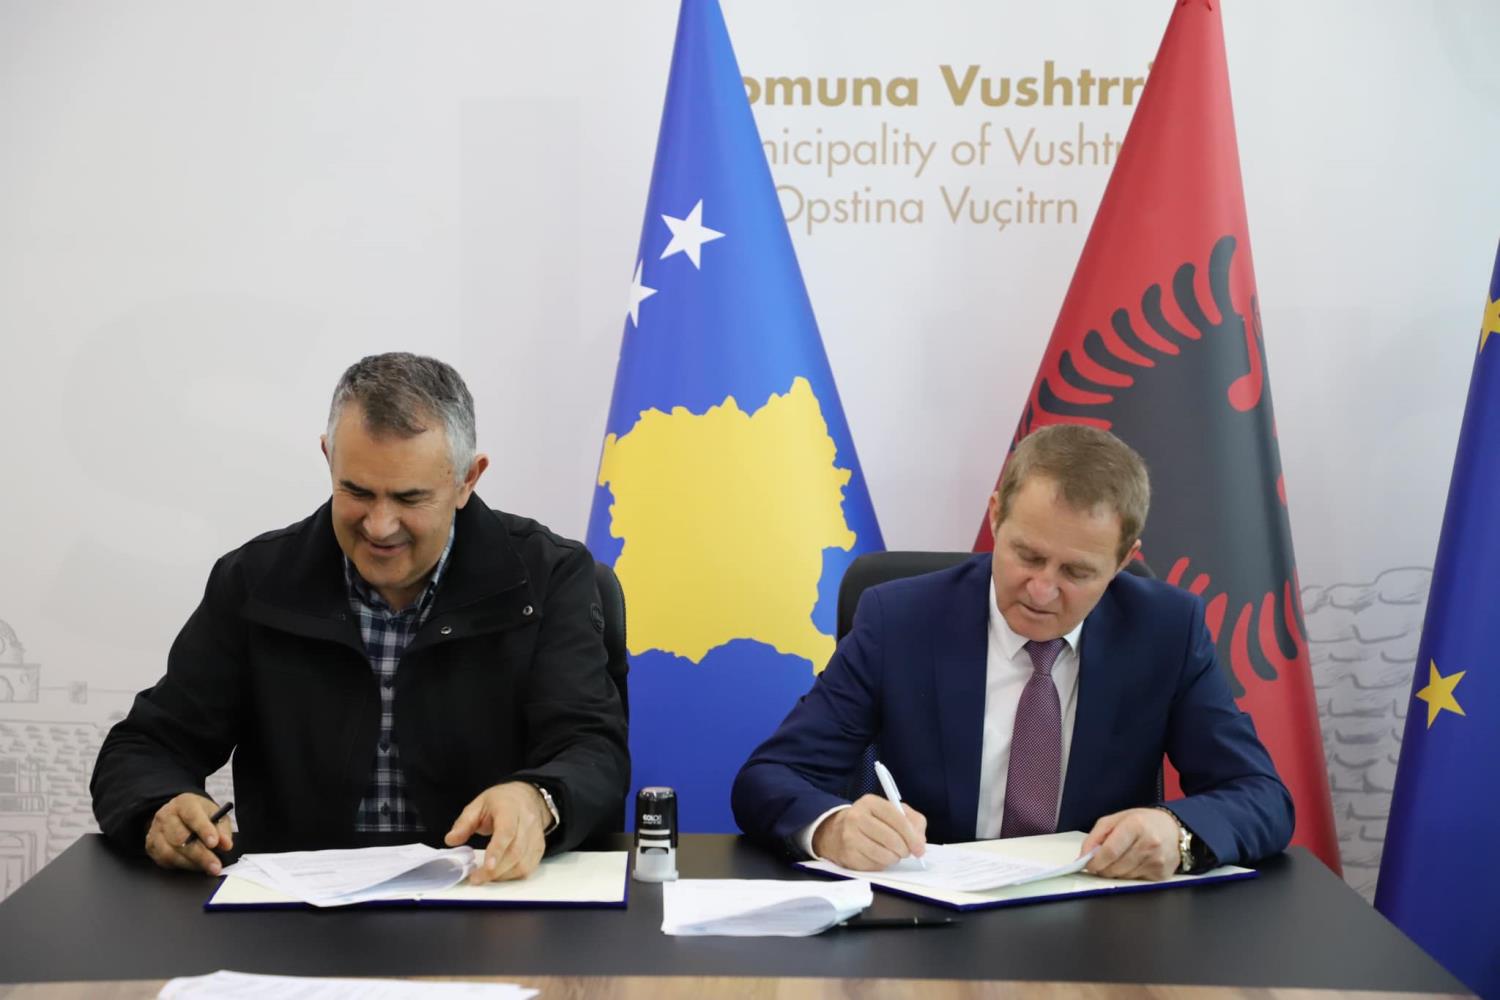 Cooperation agreements with the municipalities of Vushtrri and Shtime are signed